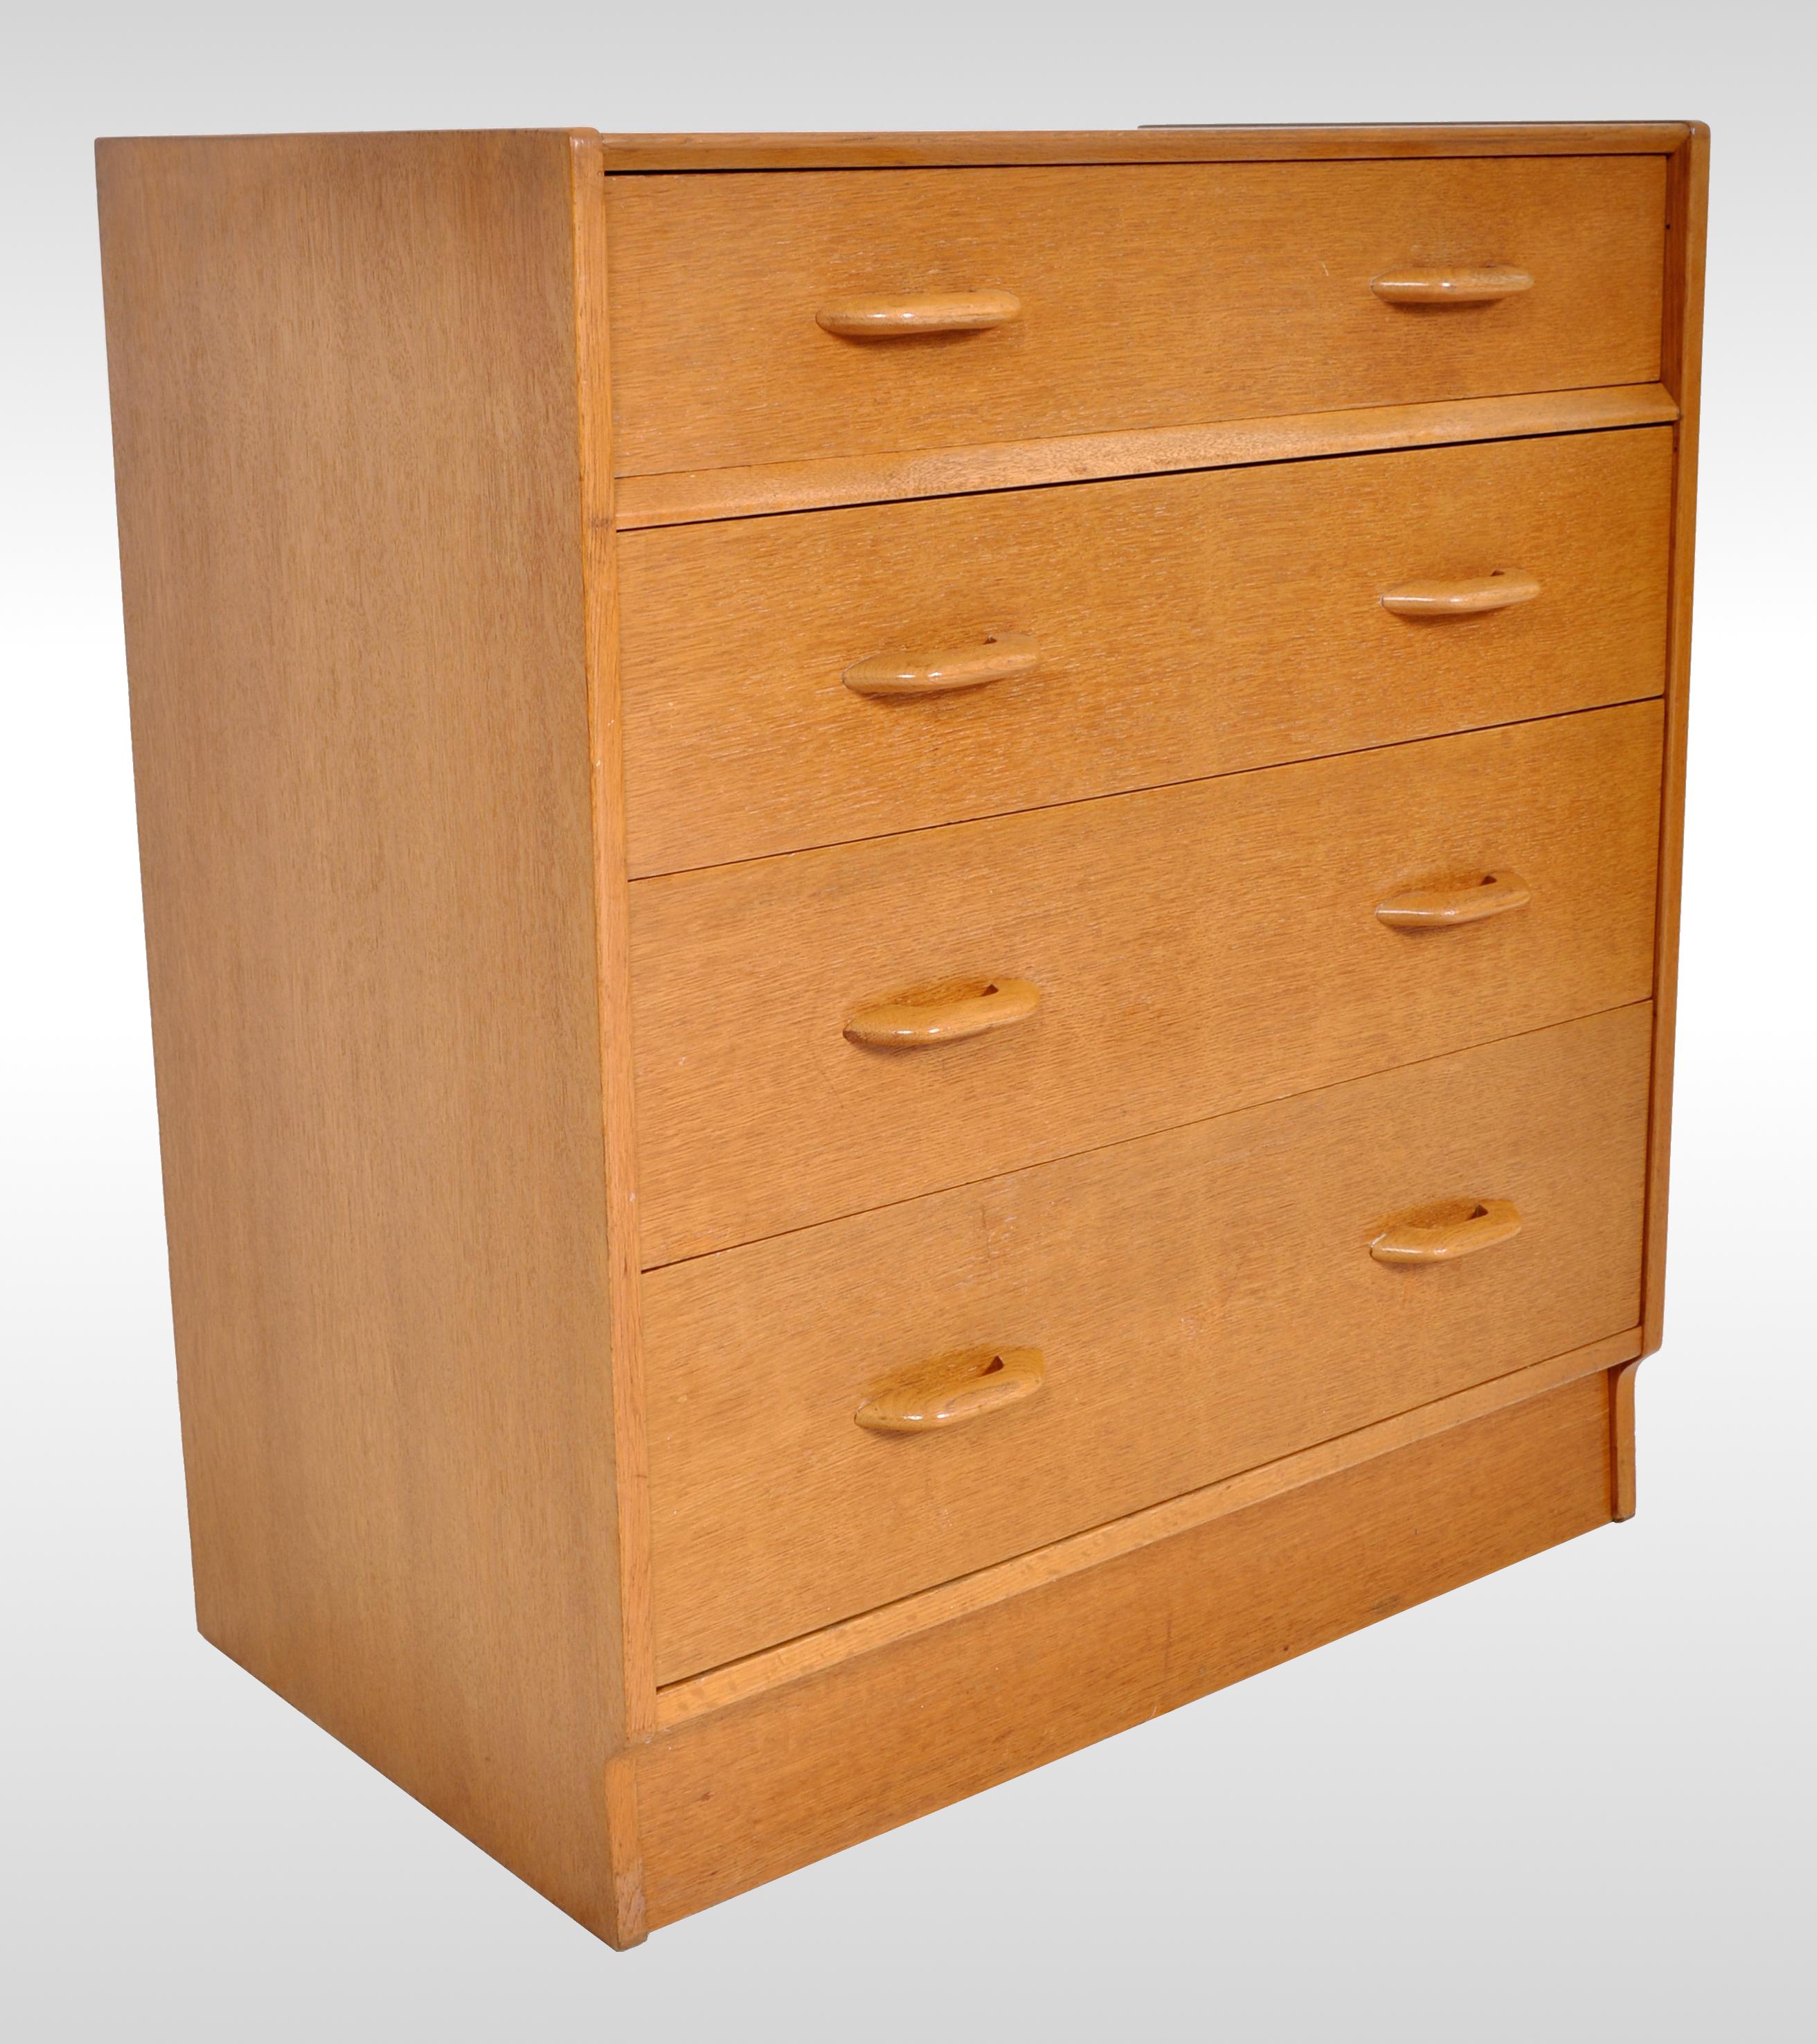 Mid-Century Modern Danish style teak chest of drawers / dresser by G Plan, 1960s. The dresser having four graduated drawers and standing on a plinth base. This chest of drawers is one of the early production models by G Plan and bears the gold 